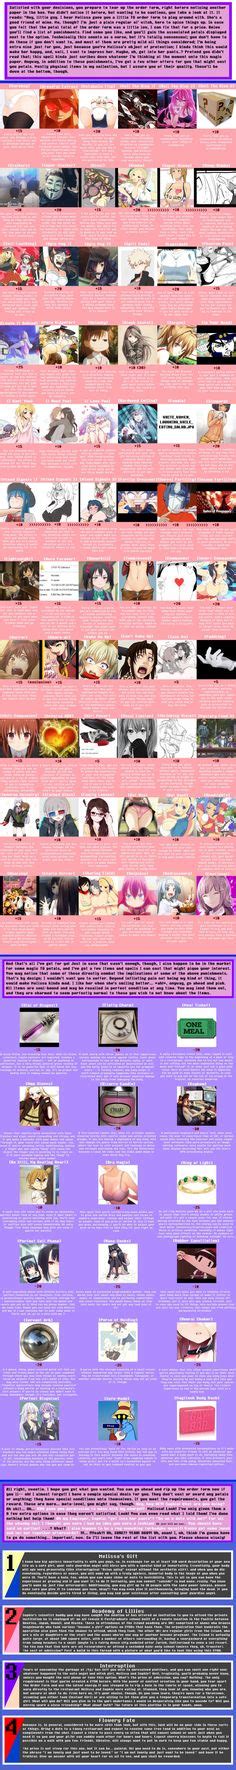 cuckold cyoa  For more information check out How it works